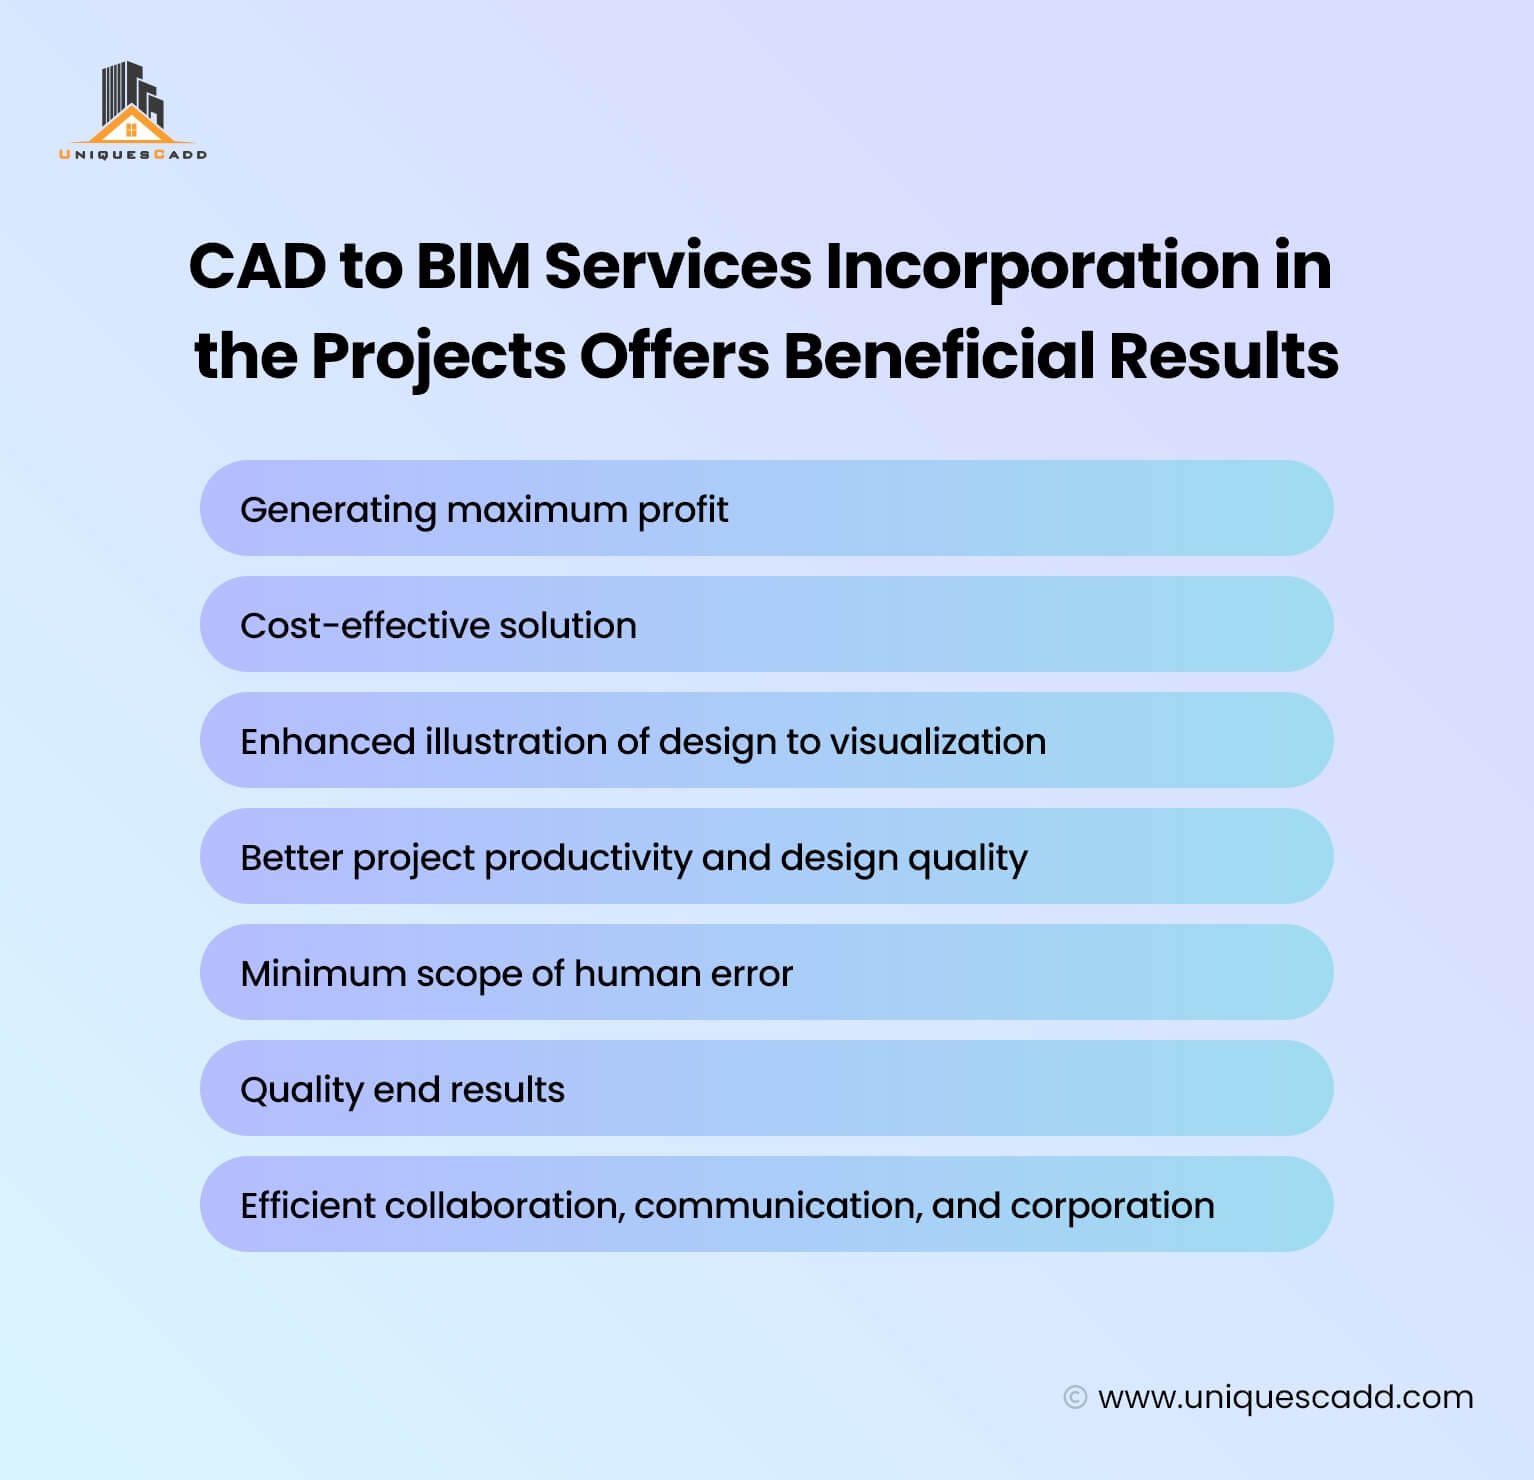 CAD to BIM Services Incorporation in the Projects Offers Beneficial Results